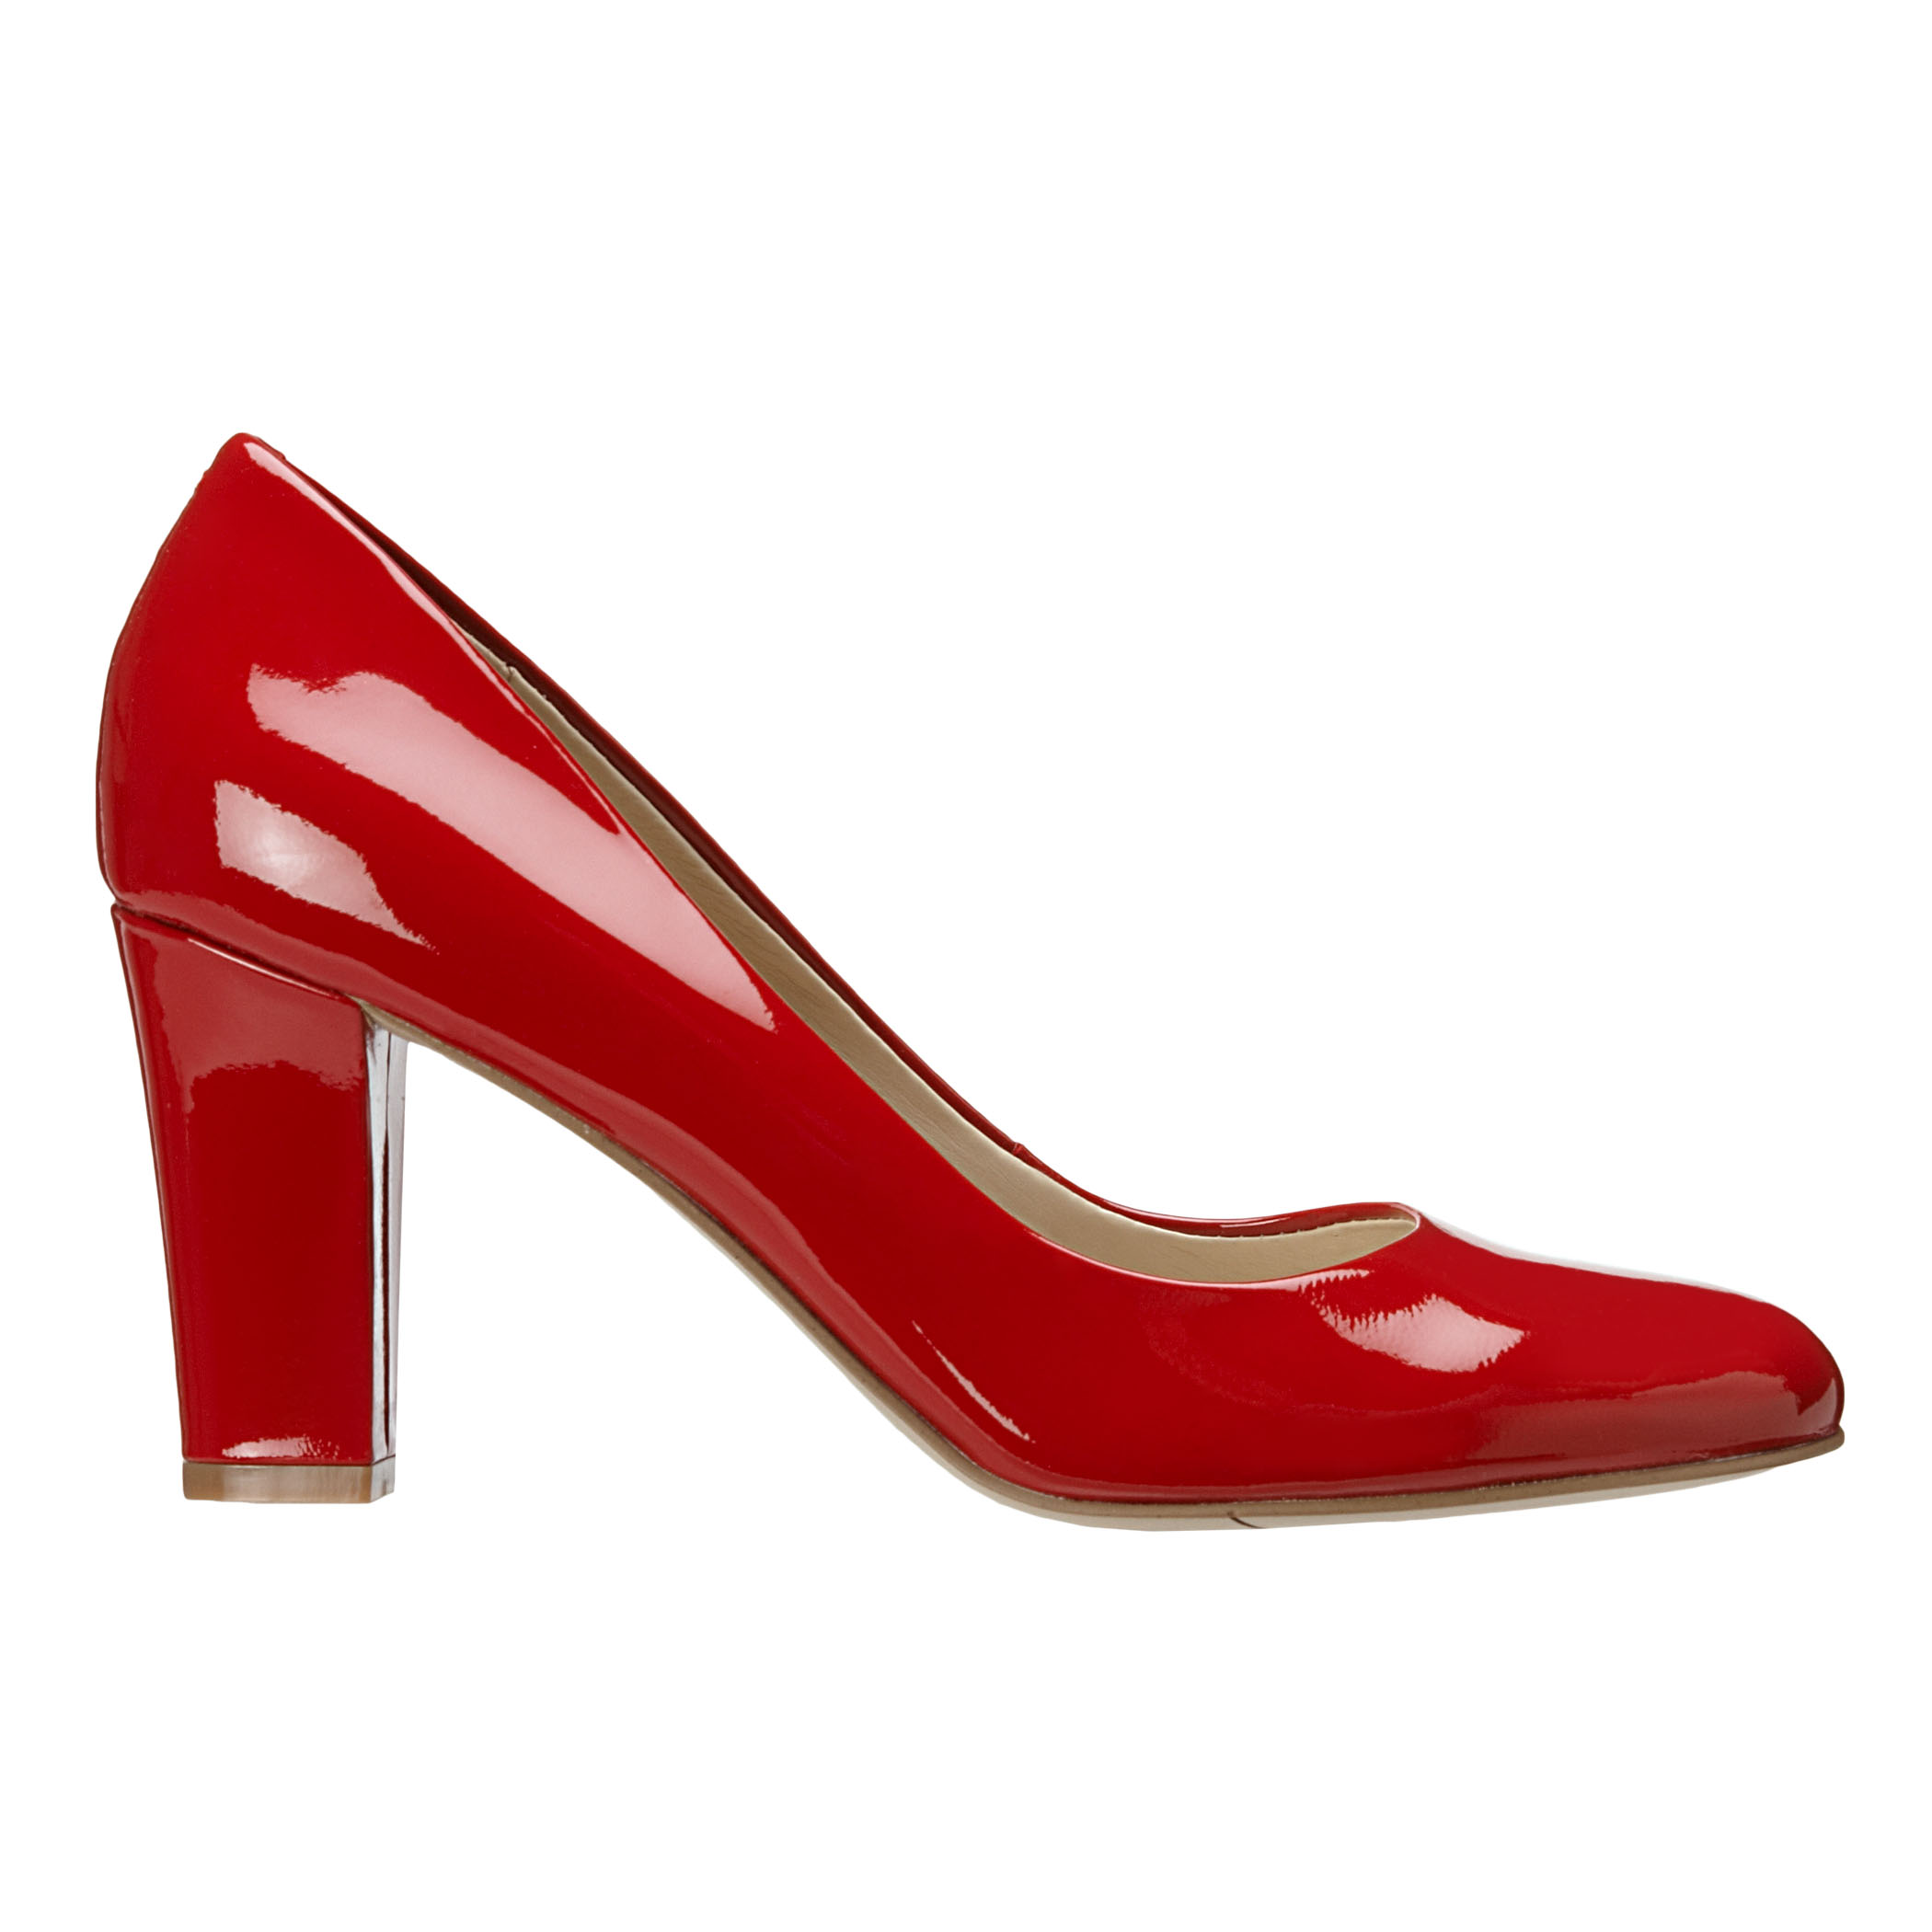 Nine West Gillyan Round Toe Pump in Red (RED PATENT LEATHER) | Lyst